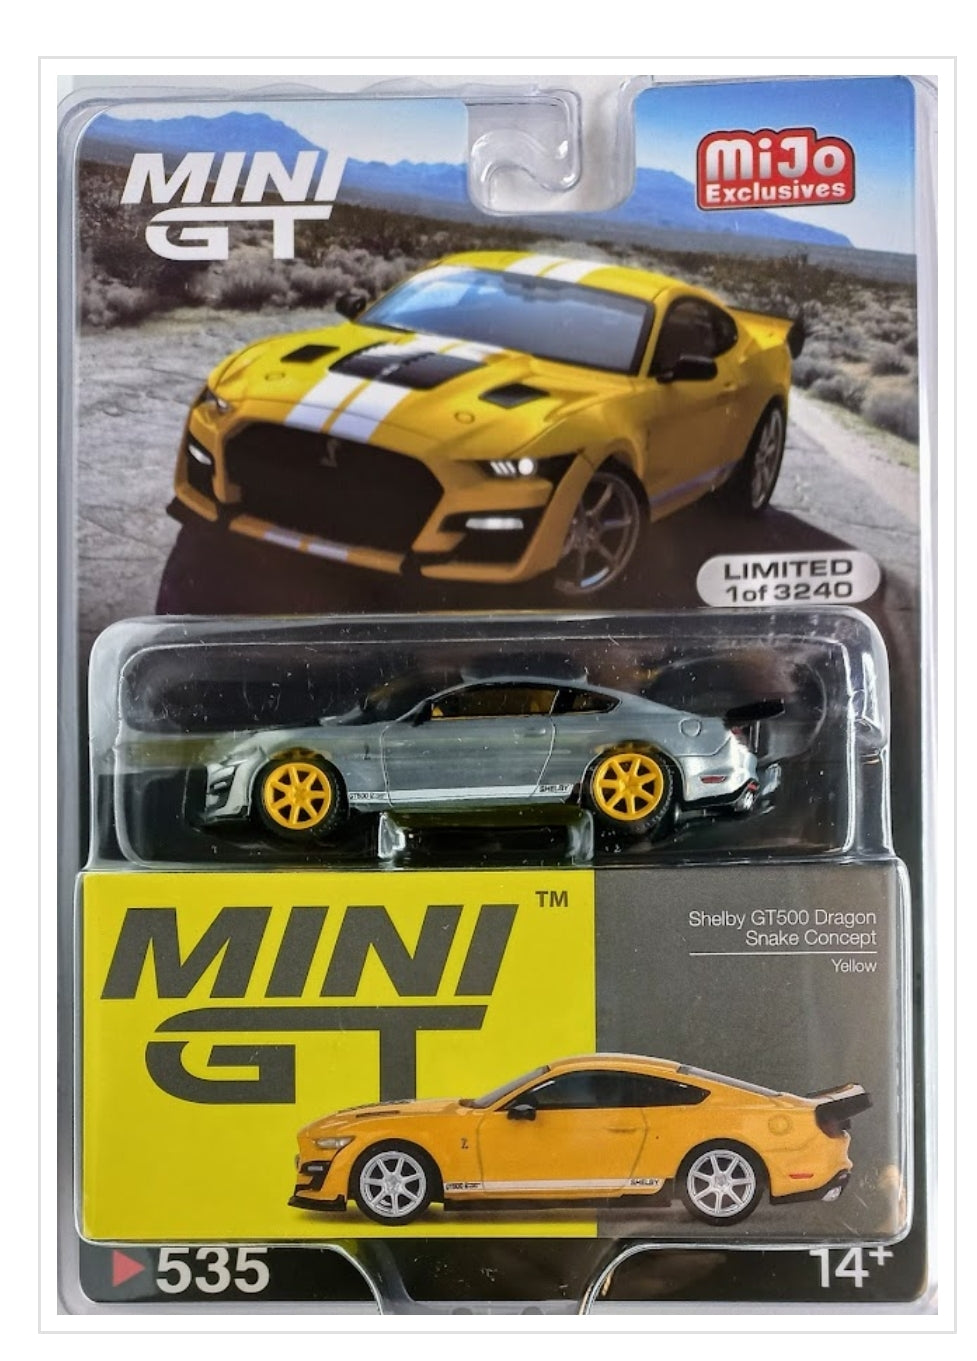 CHASE CAR-Ford Mustang Shelby GT500 Dragon Snake Concept